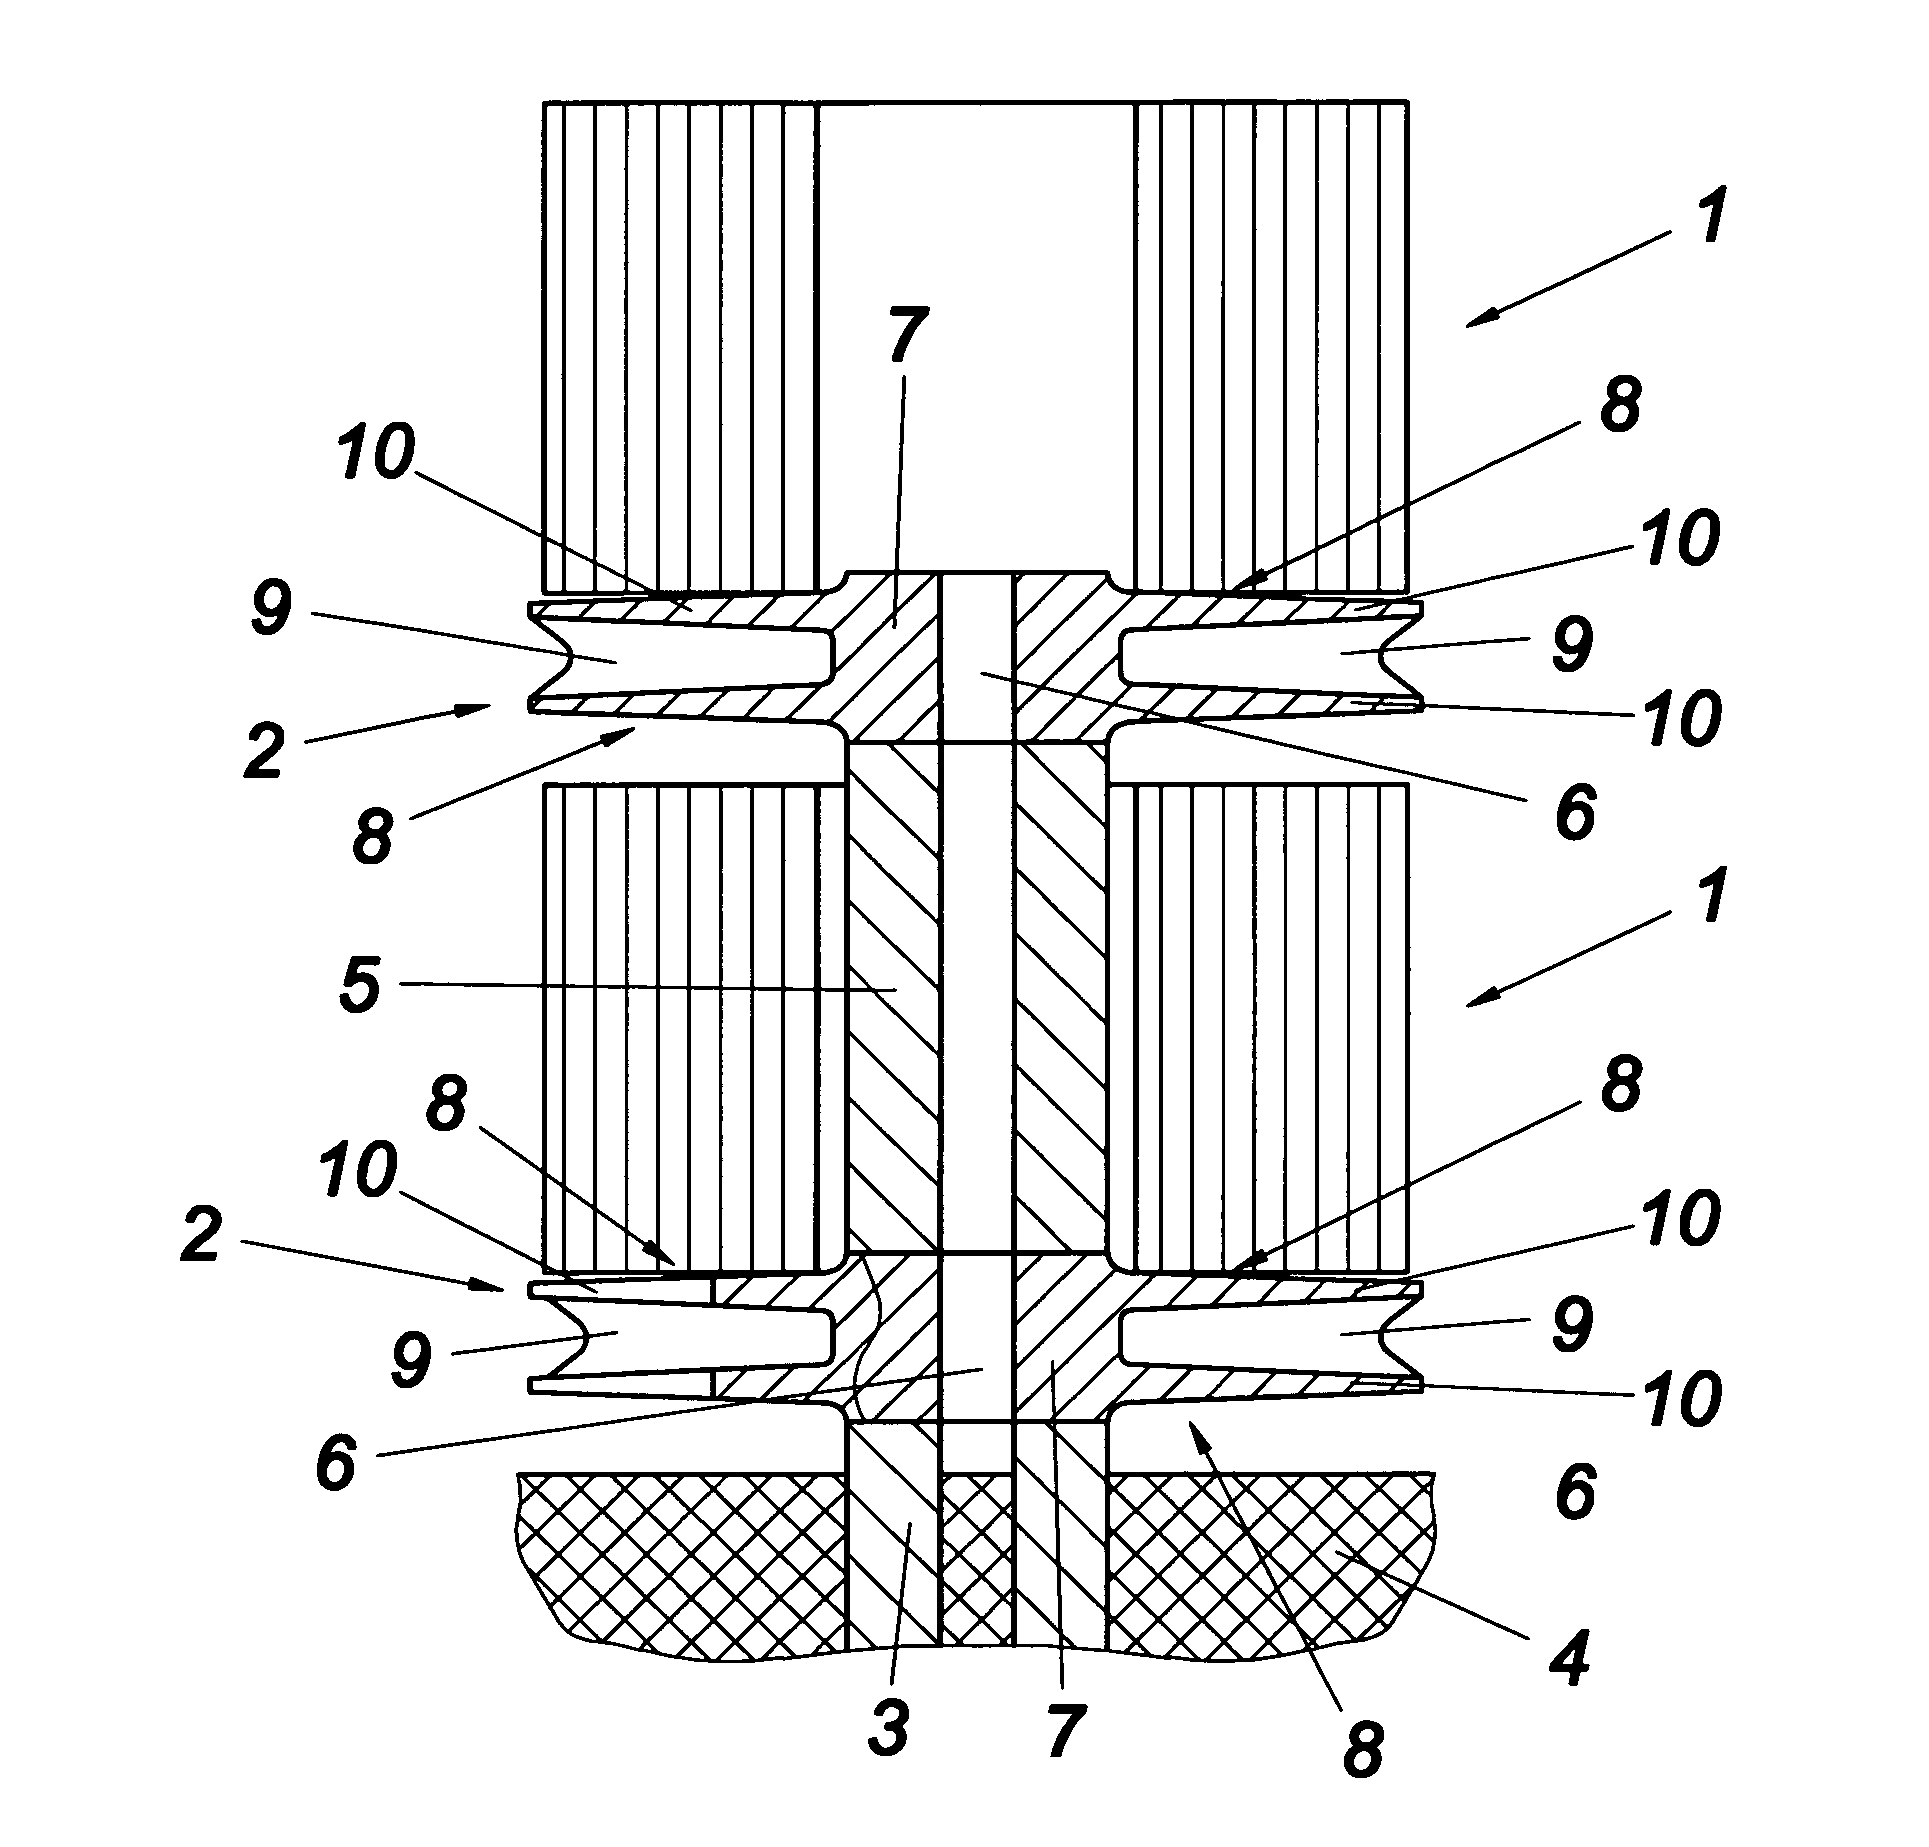 Apparatus for bracing of sheet-metal joints in a high-temperature annealing furnace